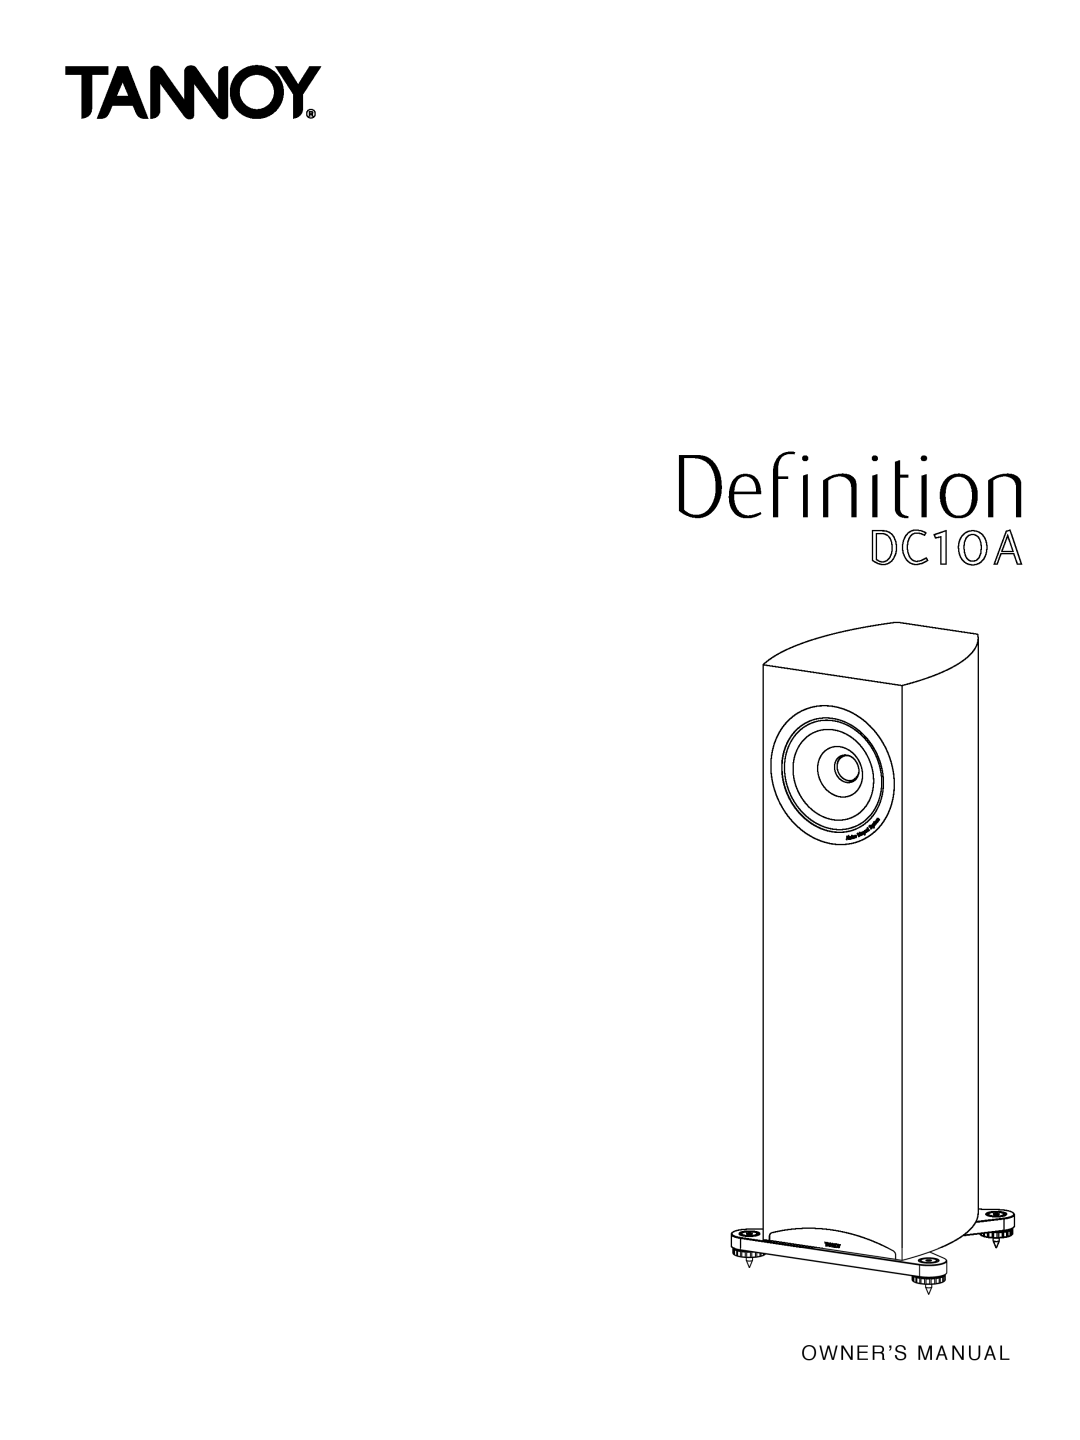 Tannoy DC10A owner manual 